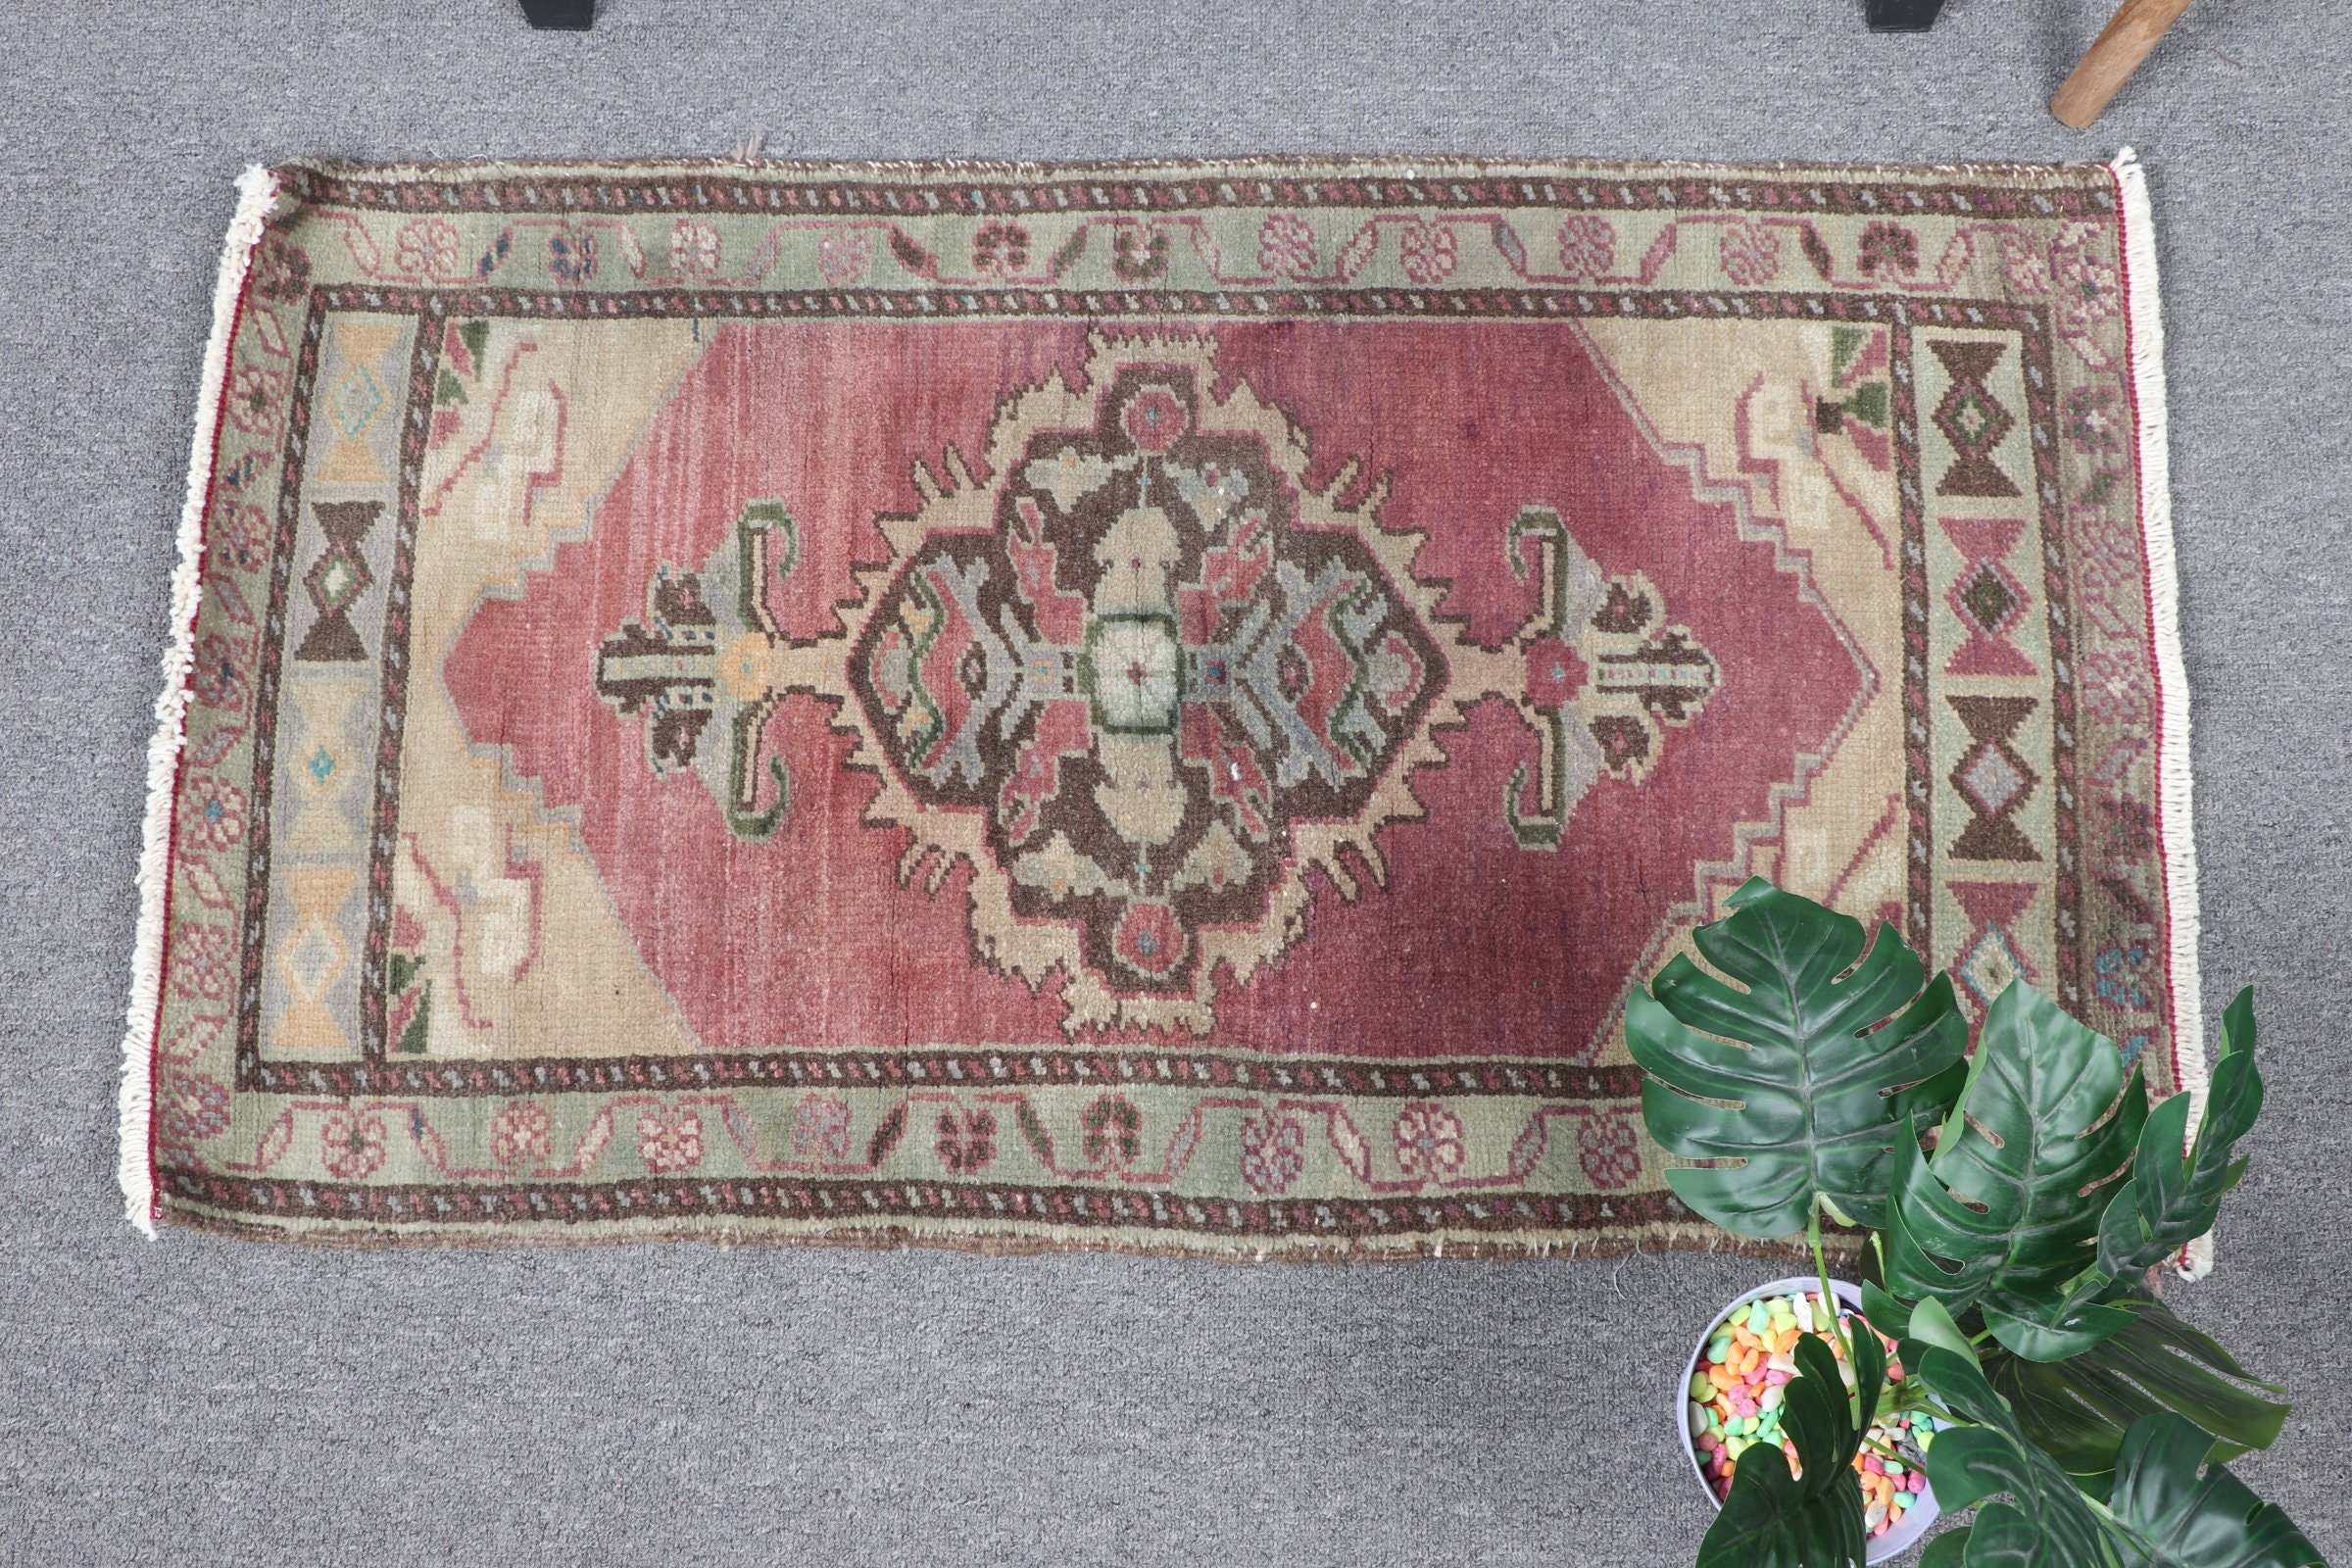 Red Moroccan Rug, Home Decor Rugs, Wall Hanging Rug, Turkish Rug, Dorm Rug, Oriental Rug, Vintage Rugs, Entry Rug, 1.8x3.1 ft Small Rugs